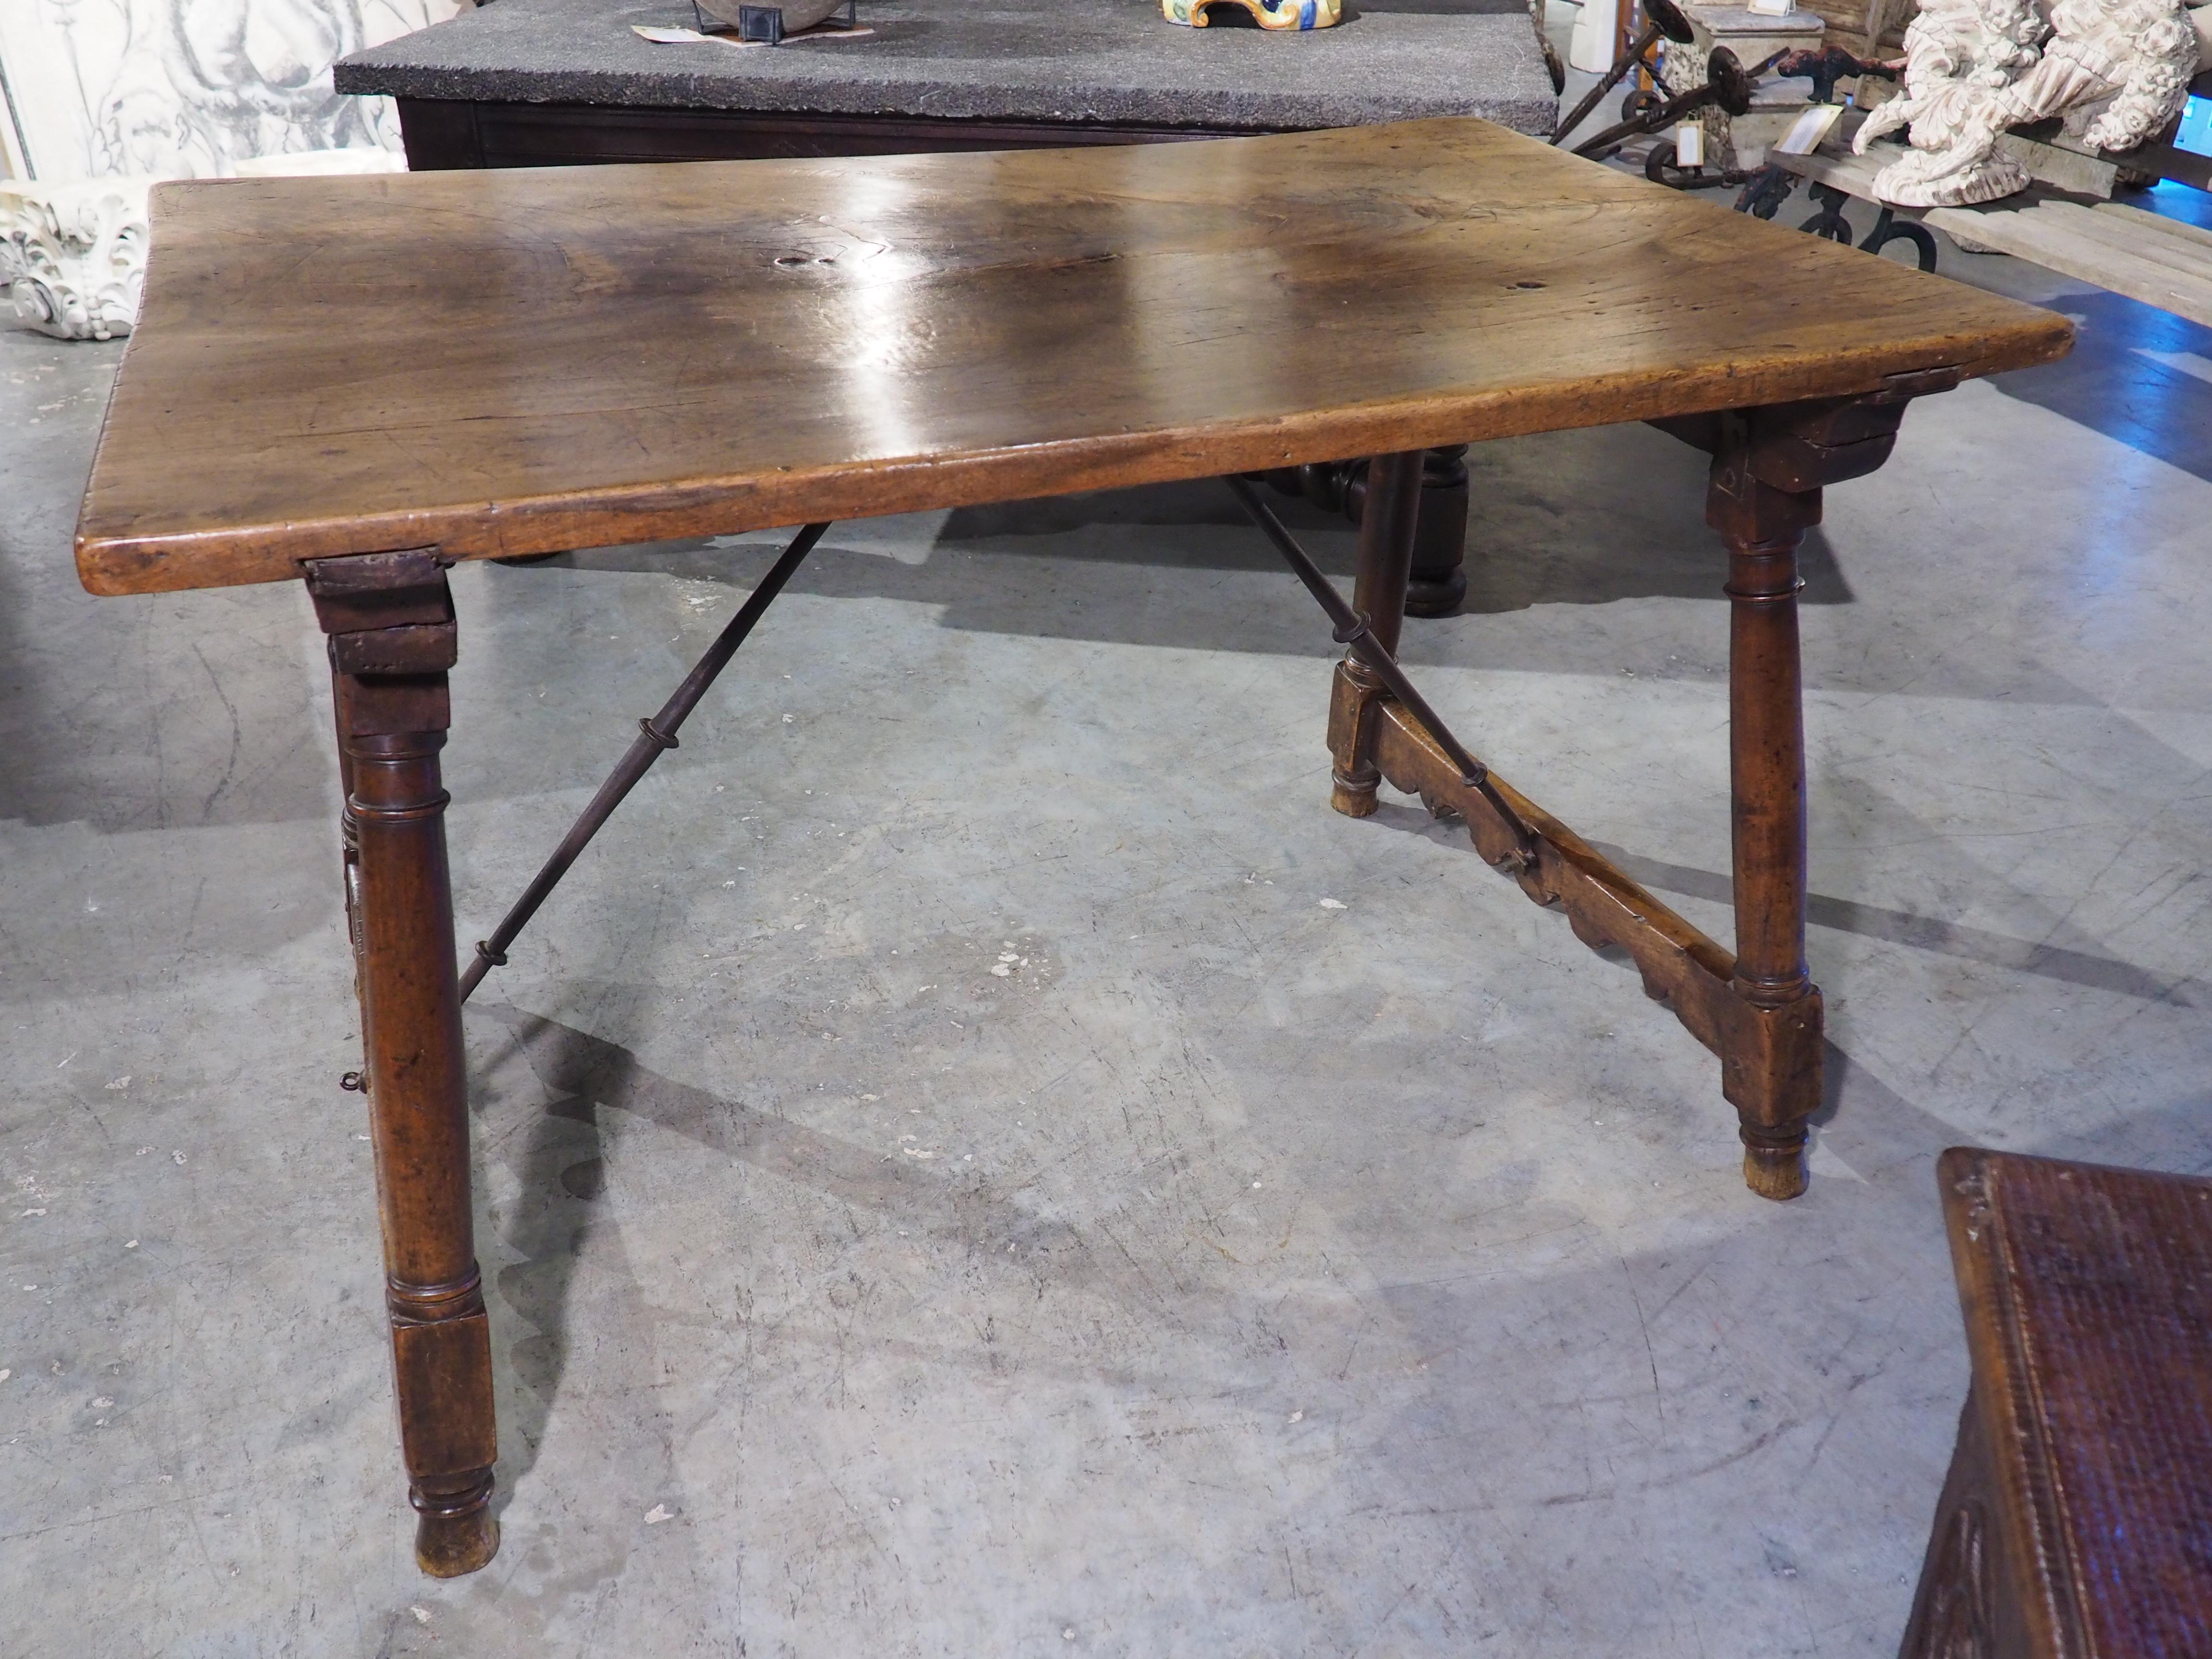 Hand-Carved 17th Century Single Walnut Plank Spanish Table with Iron Stretchers